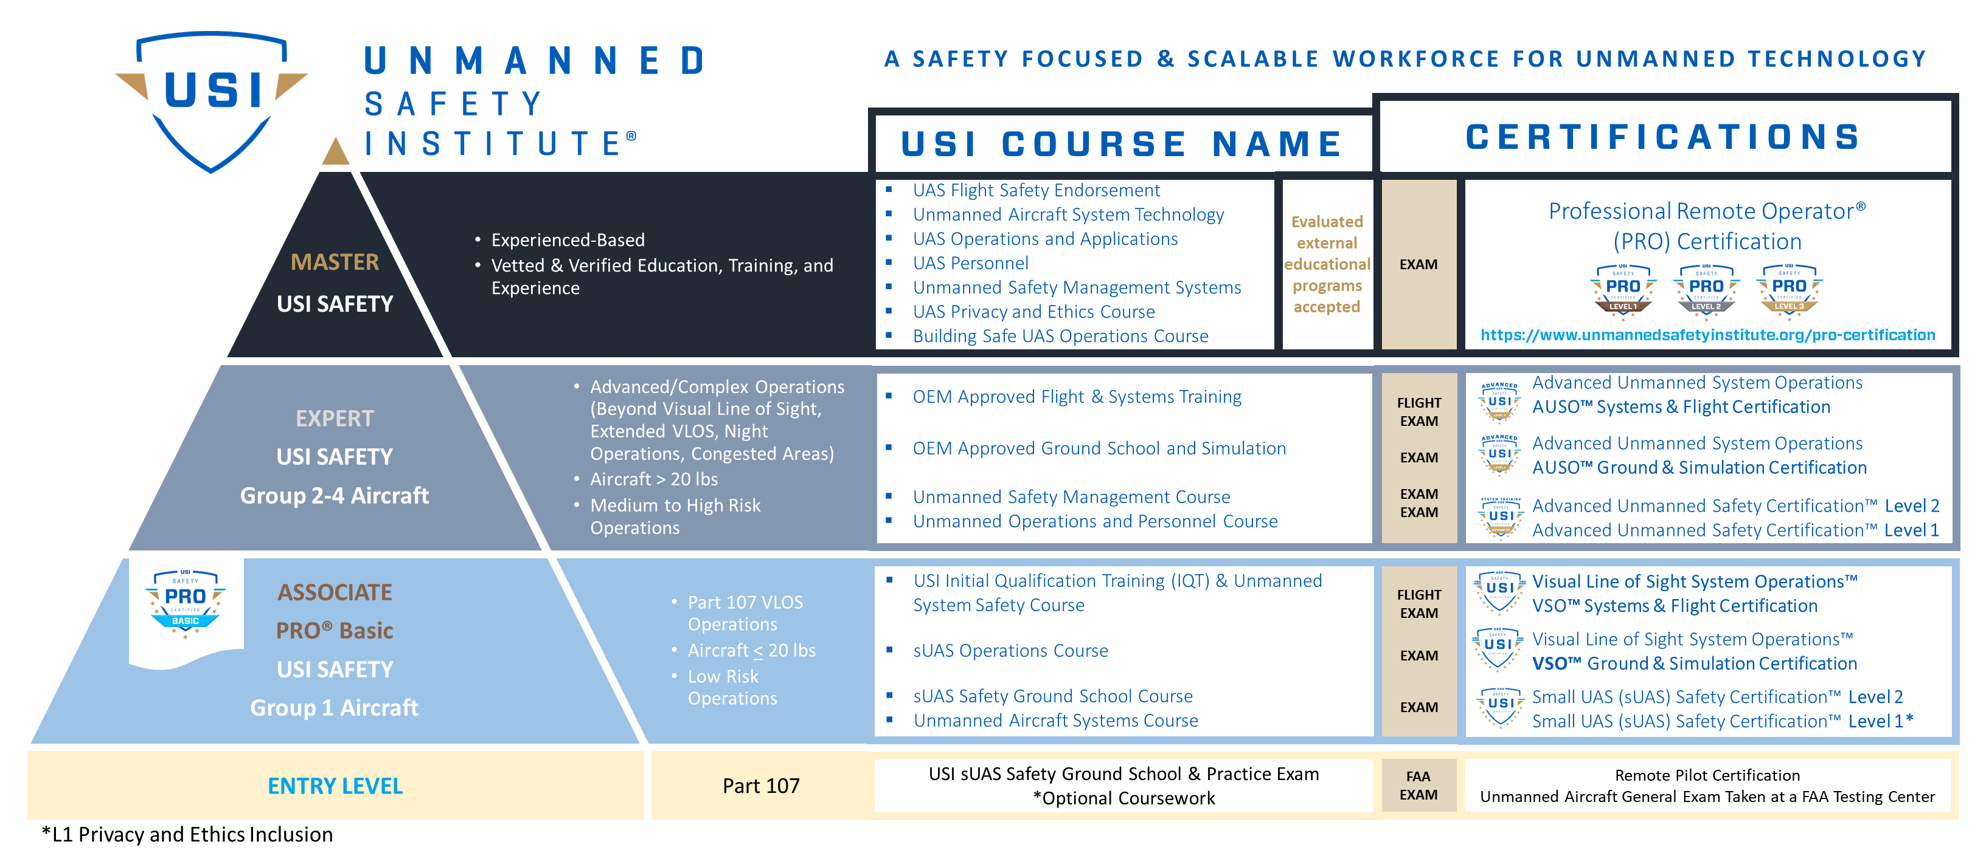 USI Industry Certification Structure